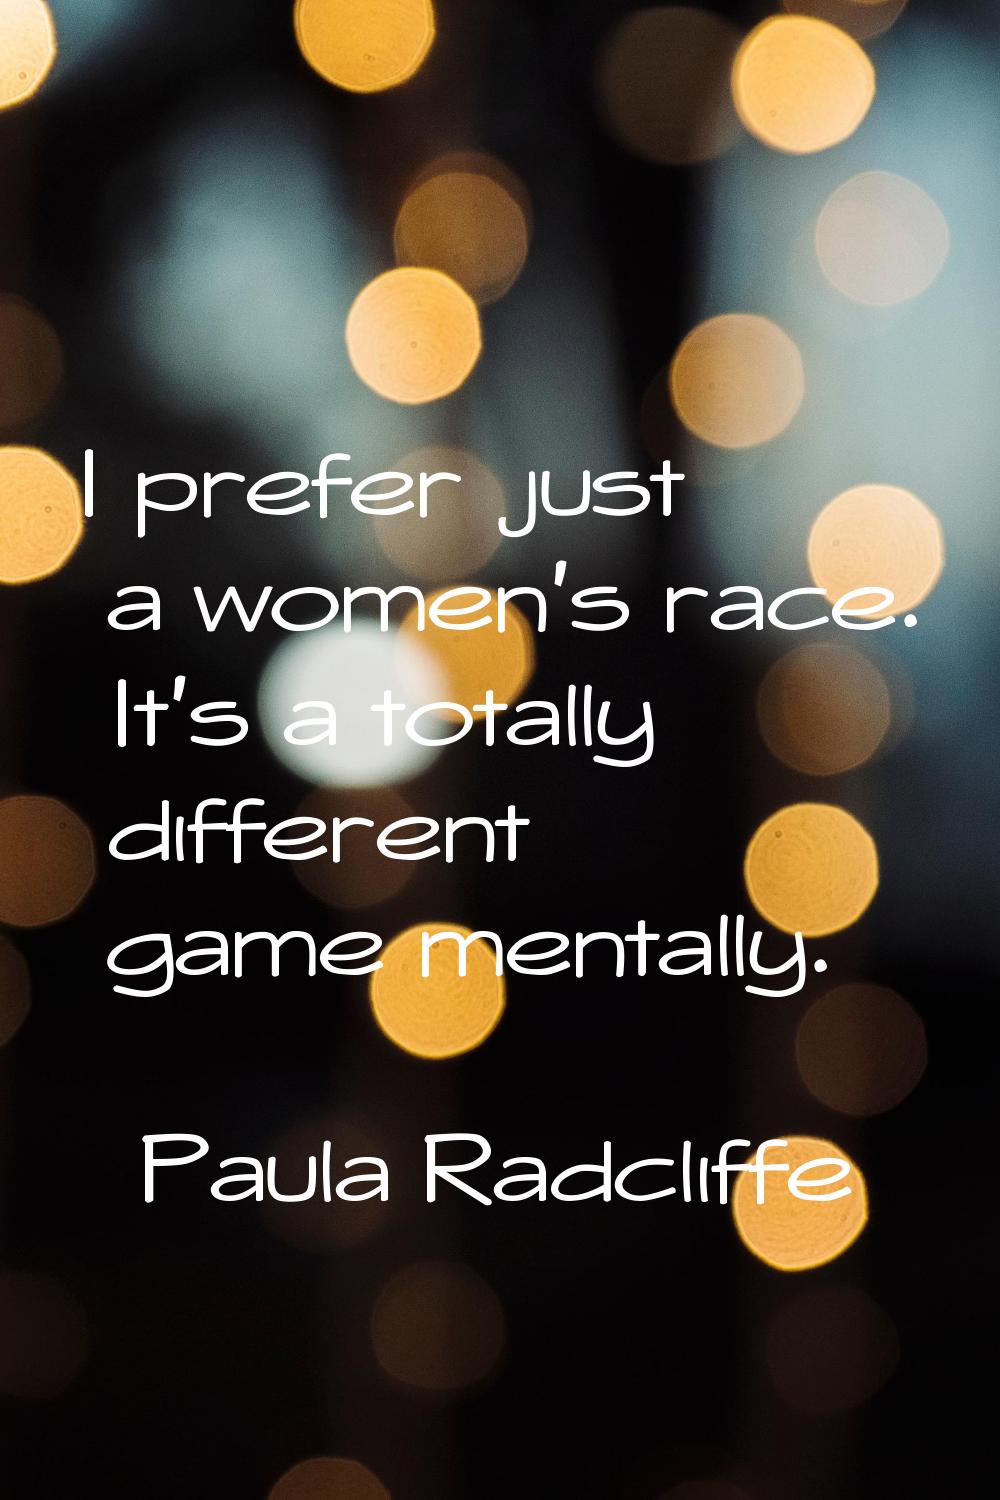 I prefer just a women's race. It's a totally different game mentally.